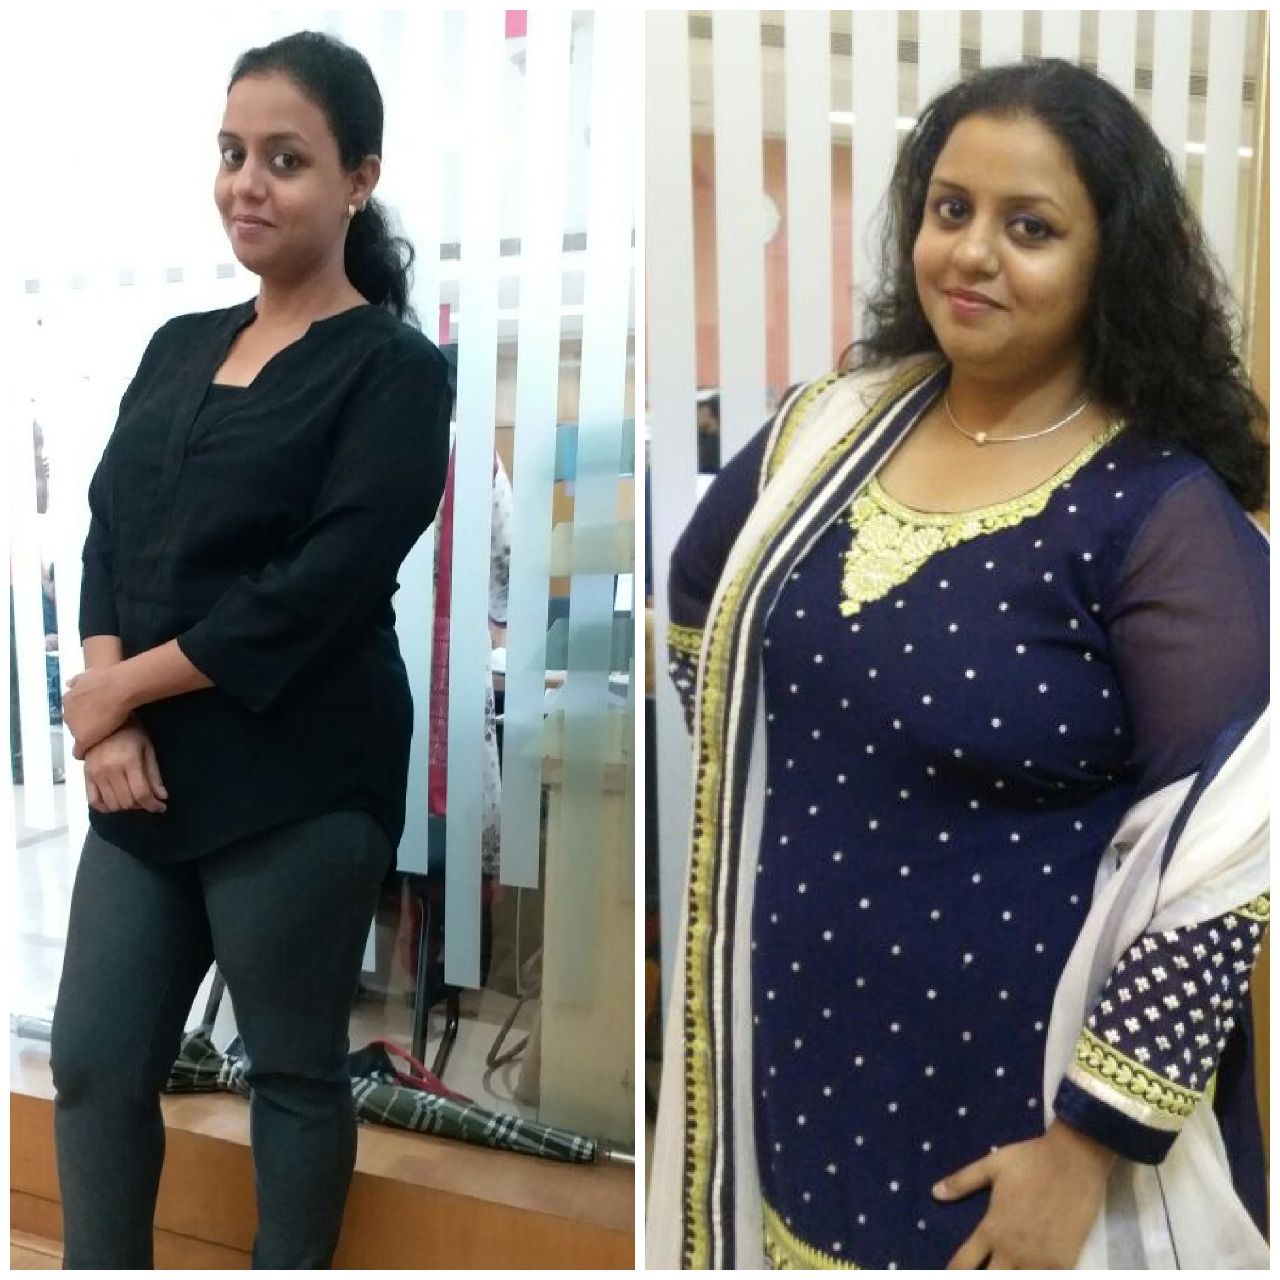 Hair-fall after bariatric surgery - Dr. Aparna Govil Bhasker